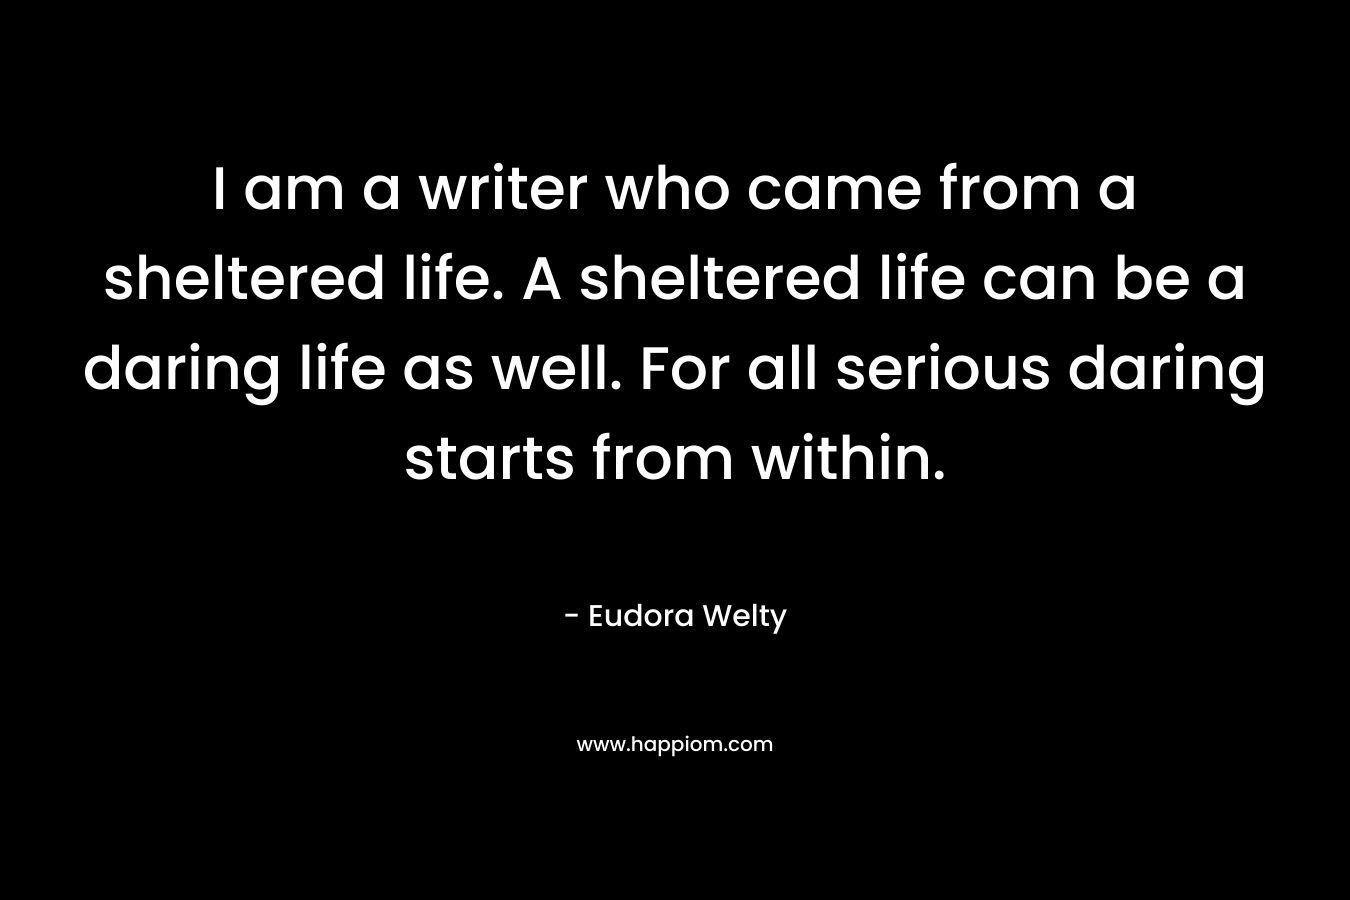 I am a writer who came from a sheltered life. A sheltered life can be a daring life as well. For all serious daring starts from within. – Eudora Welty